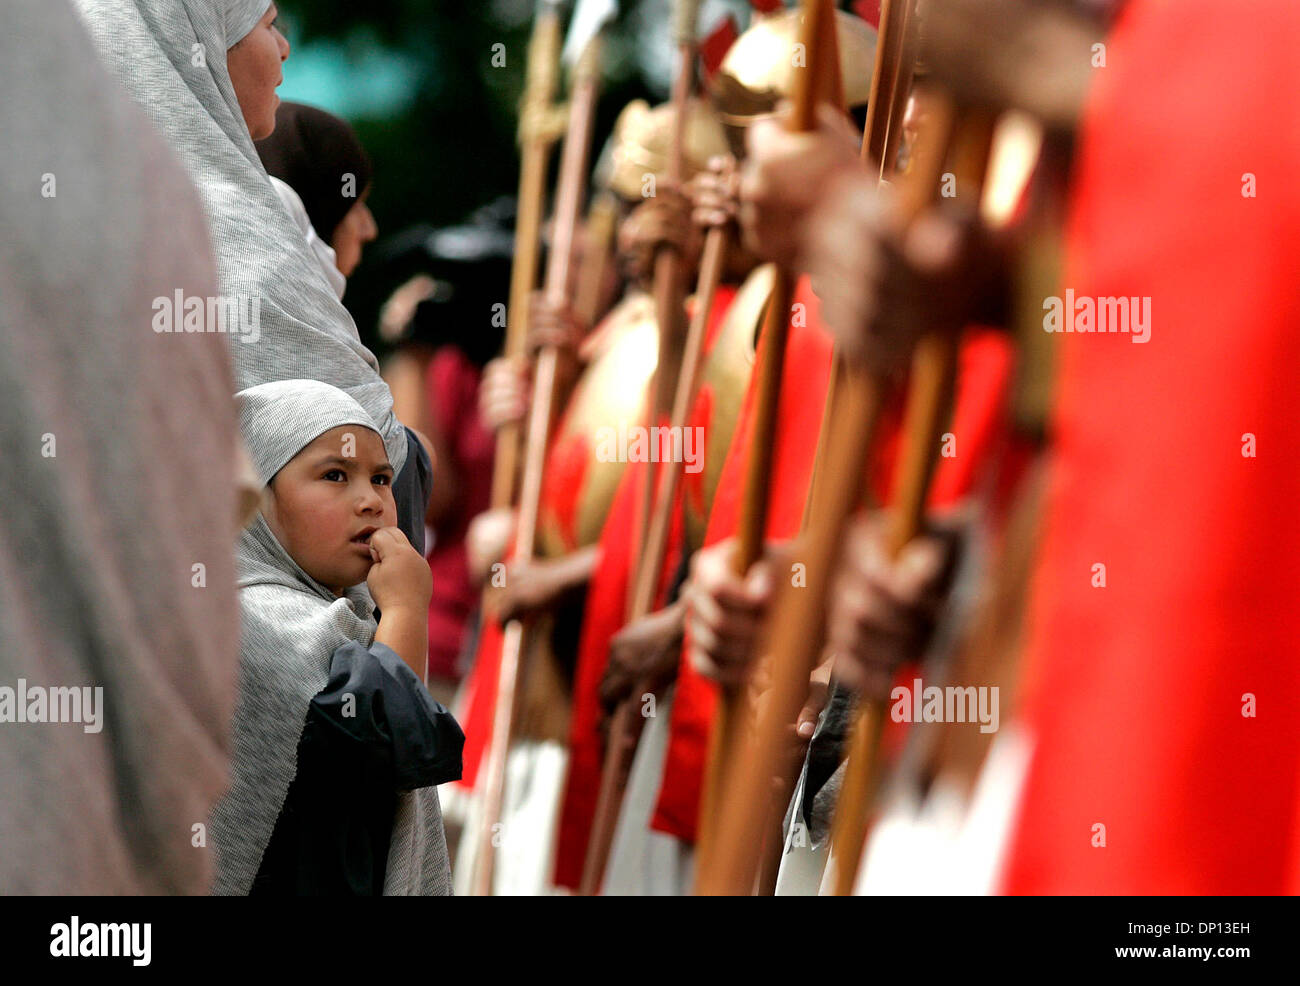 Apr 14, 2006; San Antonio, TX, USA; A child portraying a villager stands before a row of armed roman guards during San Fernando Cathedral's annual Via Crucis in Milam Park in San Antonio. Mandatory Credit: Photo by Mike Kane/ZUMA Press. (©) Copyright 2006 by San Antonio Express-News Stock Photo